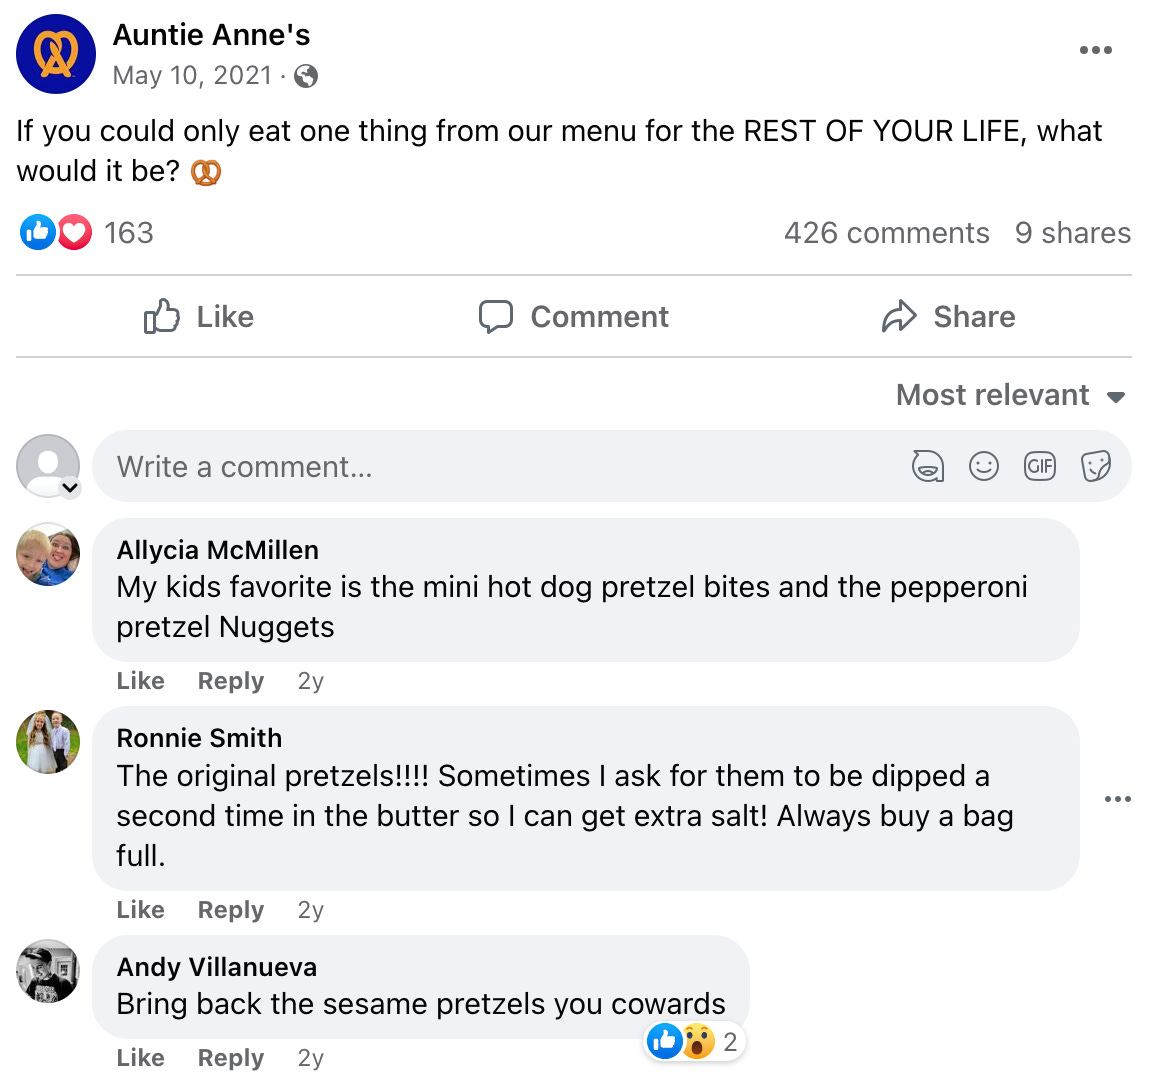 example FB post from auntie anne's that asks "if you could only eat one thing from our menu for the rest of your life what would it be?"